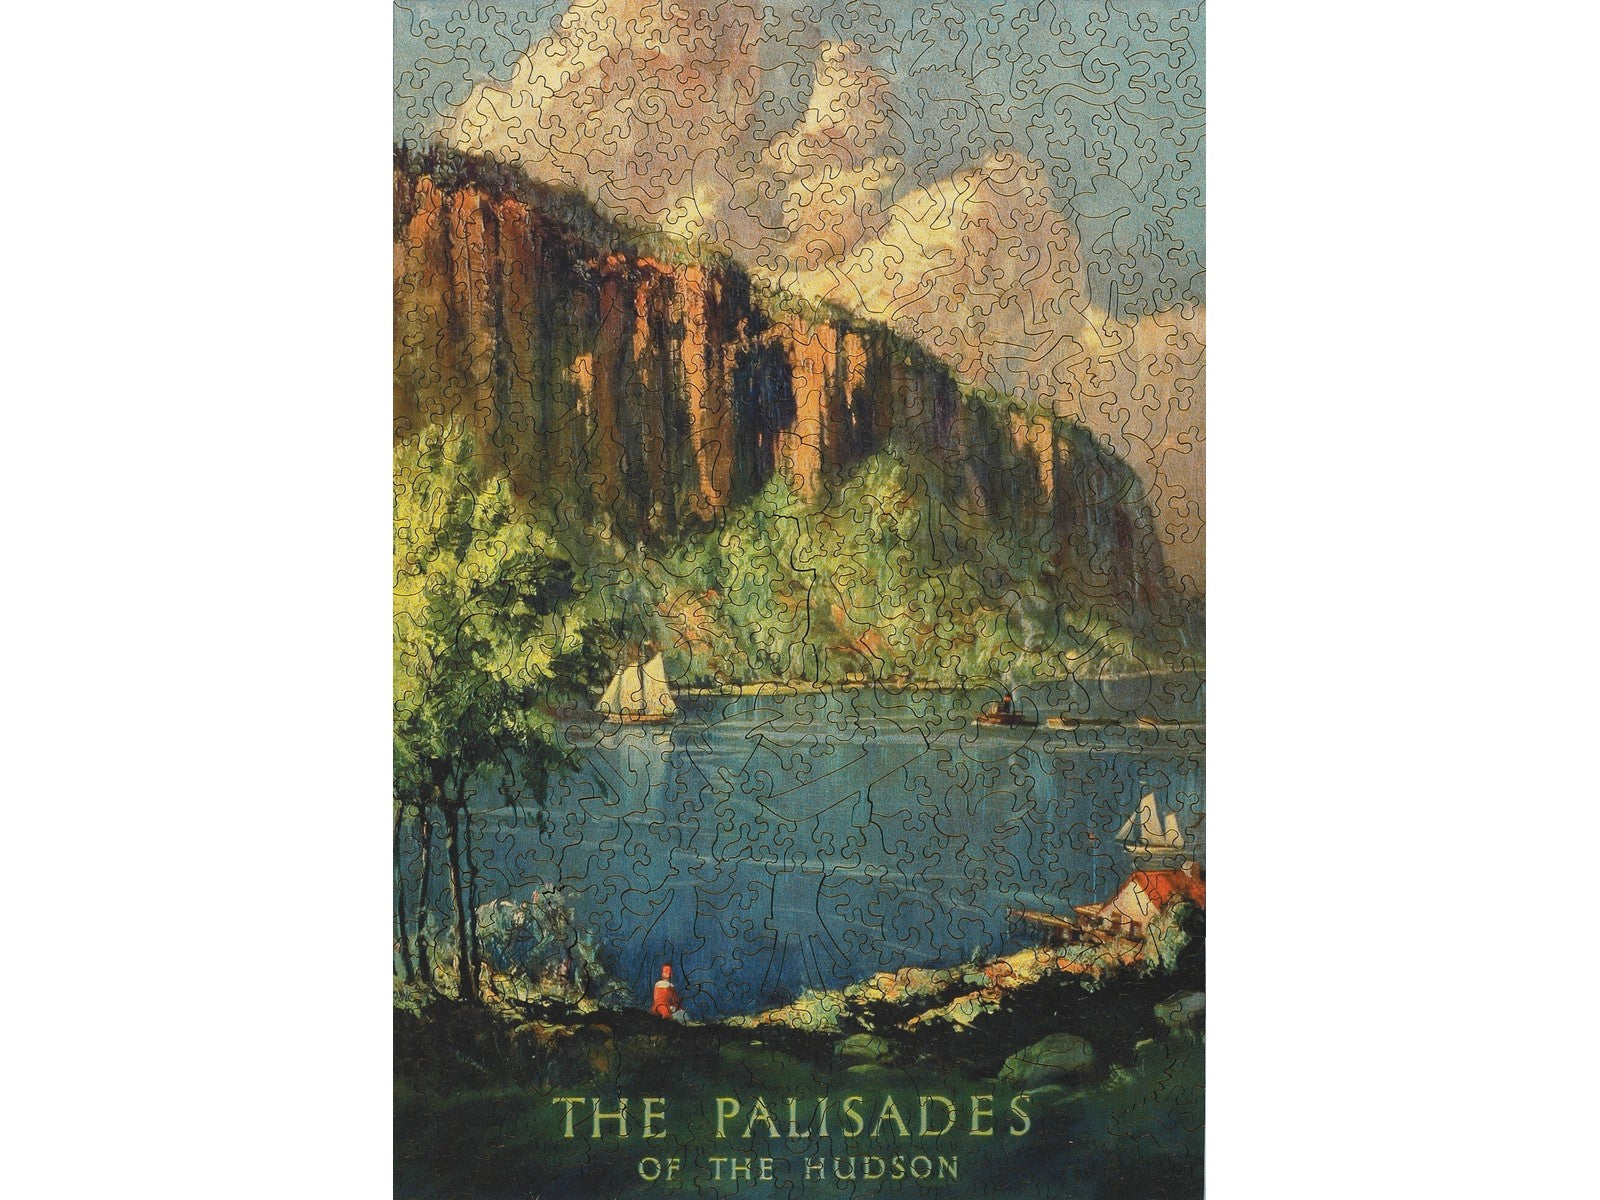 The front of the puzzle, The Palisades of the Hudson, which shows boats on a river, surrounded by cliffs.